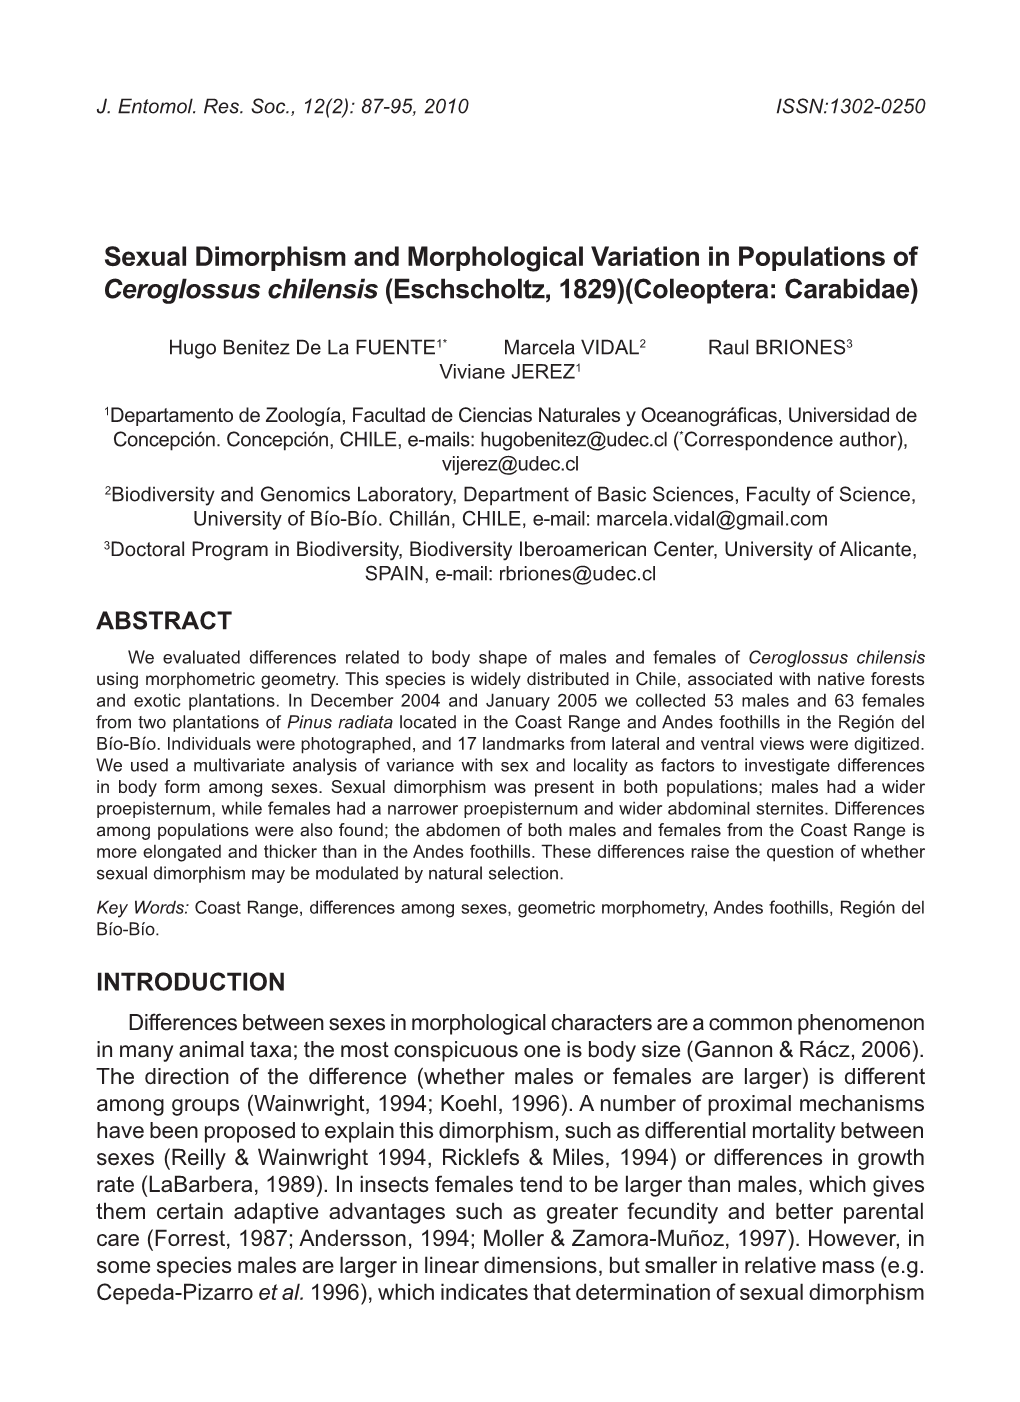 Sexual Dimorphism and Morphological Variation in Populations of Ceroglossus Chilensis (Eschscholtz, 1829)(Coleoptera: Carabidae)